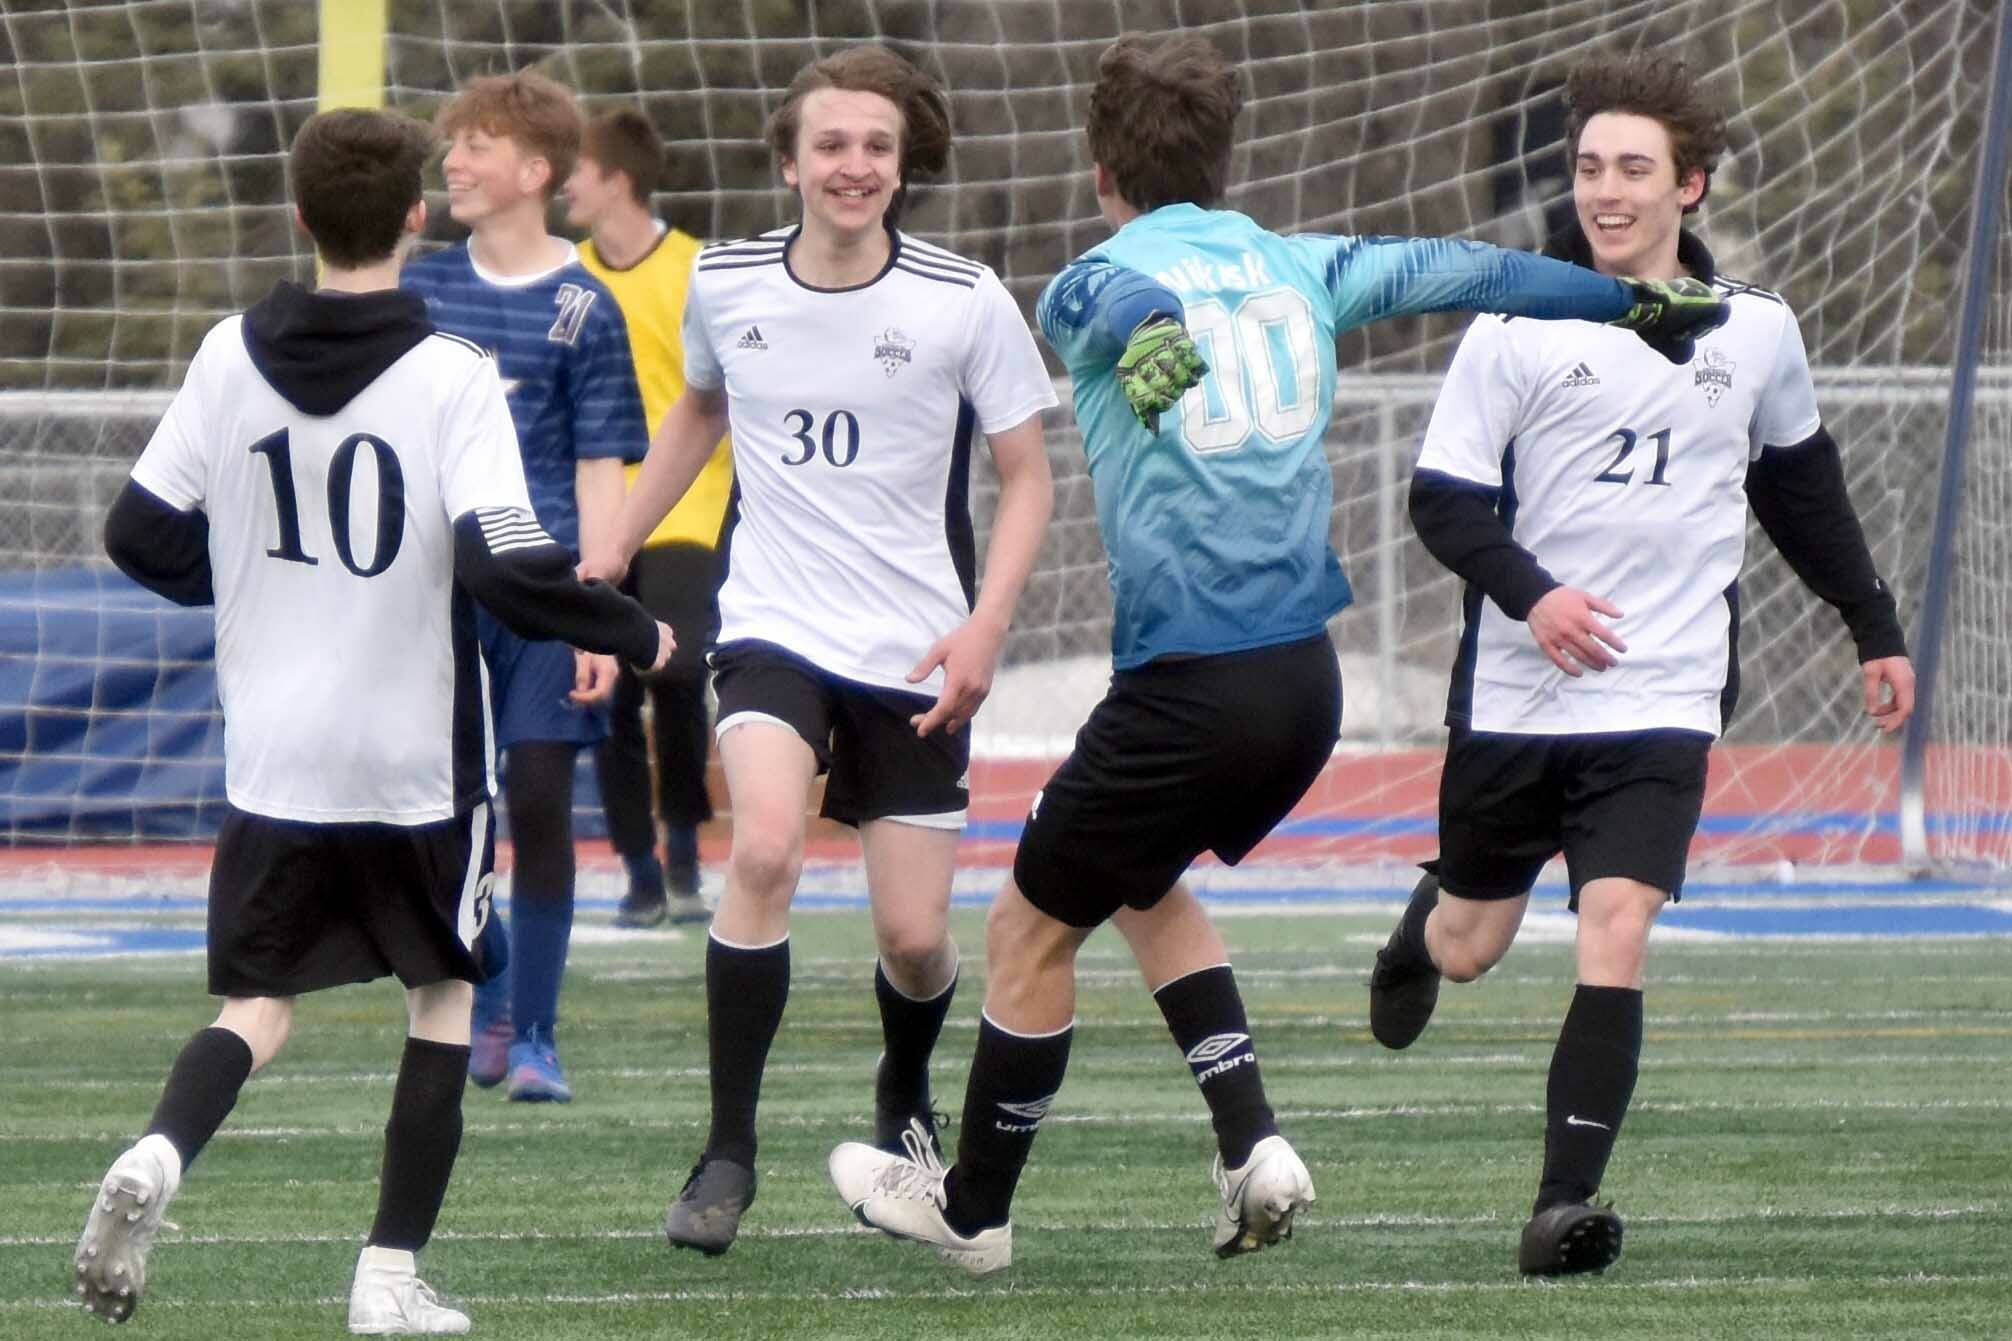 The Nikiski boys soccer team celebrates the goal of Niles Broussard (30) on Wednesday, May 3, 2023, at Justin Maile Field at Soldotna High School in Soldotna, Alaska. (Photo by Jeff Helminiak/Peninsula Clarion)